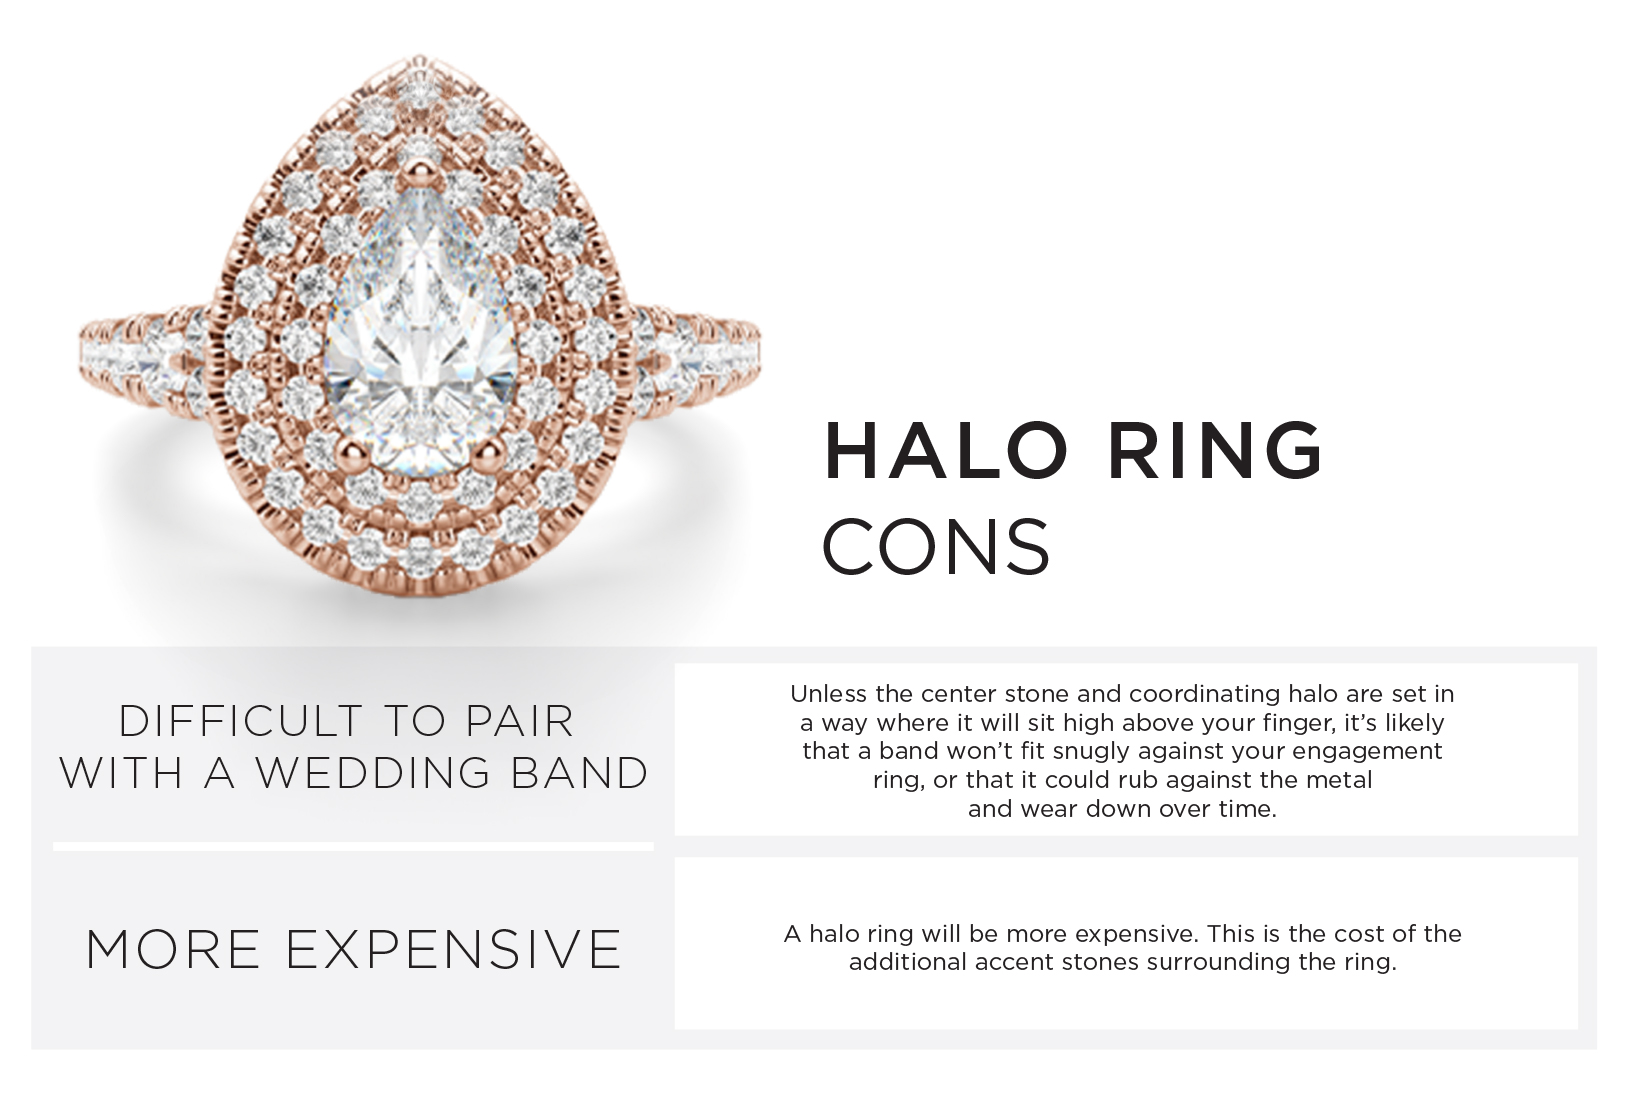 Halo Ring Cons